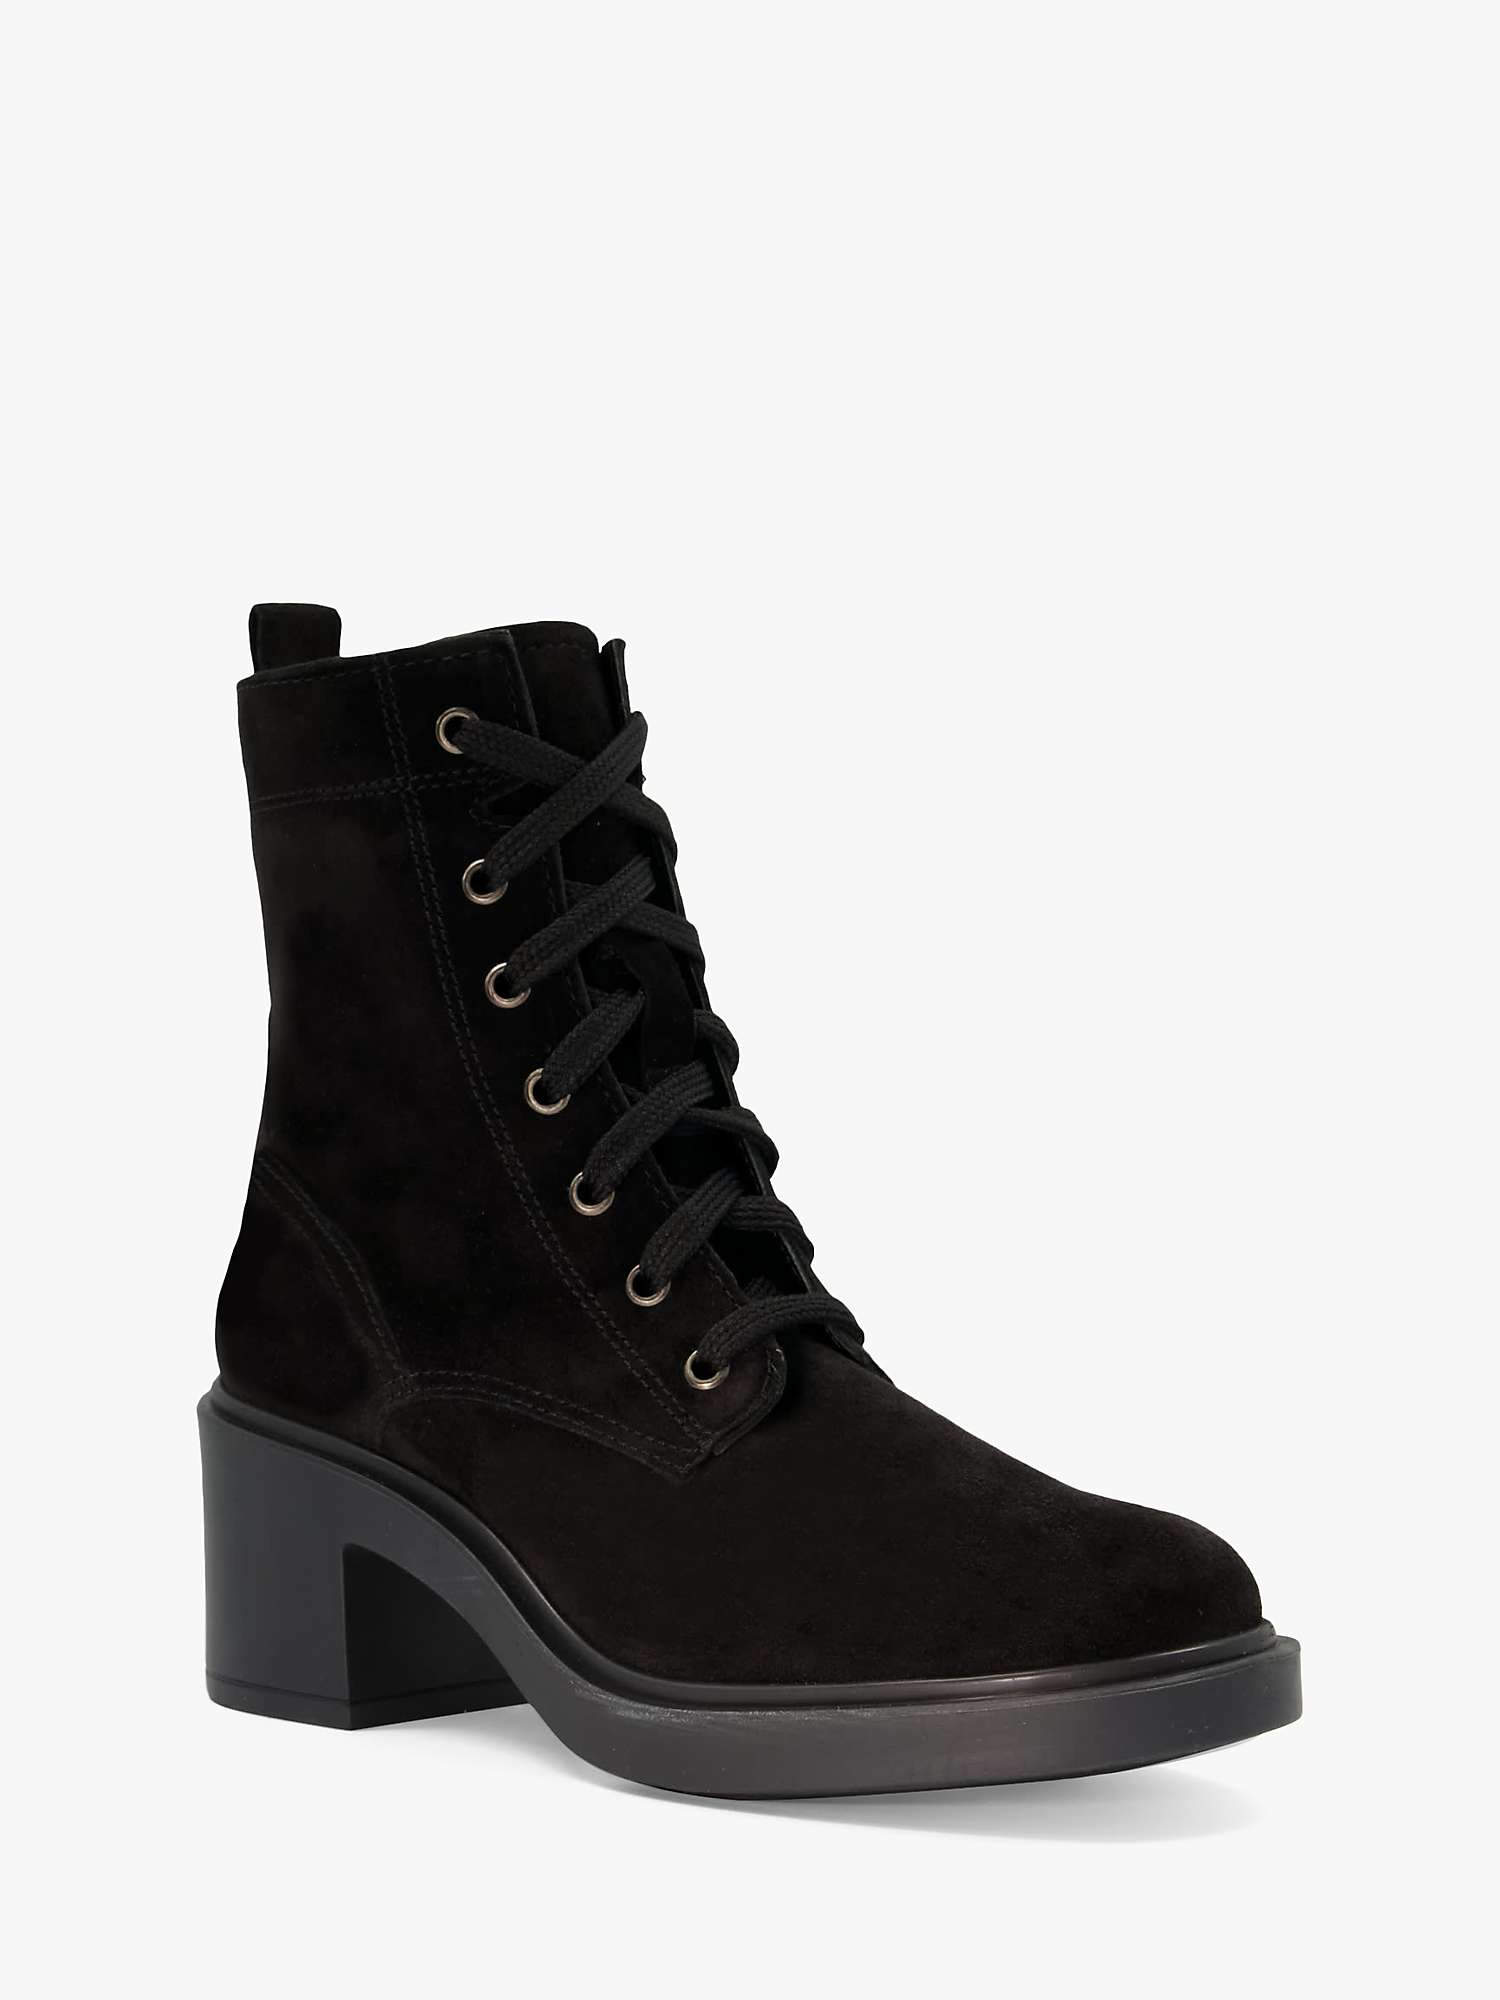 limbs There is a need to sin Dune Pastel Suede Lace Up Ankle Boots, Black at John Lewis & Partners